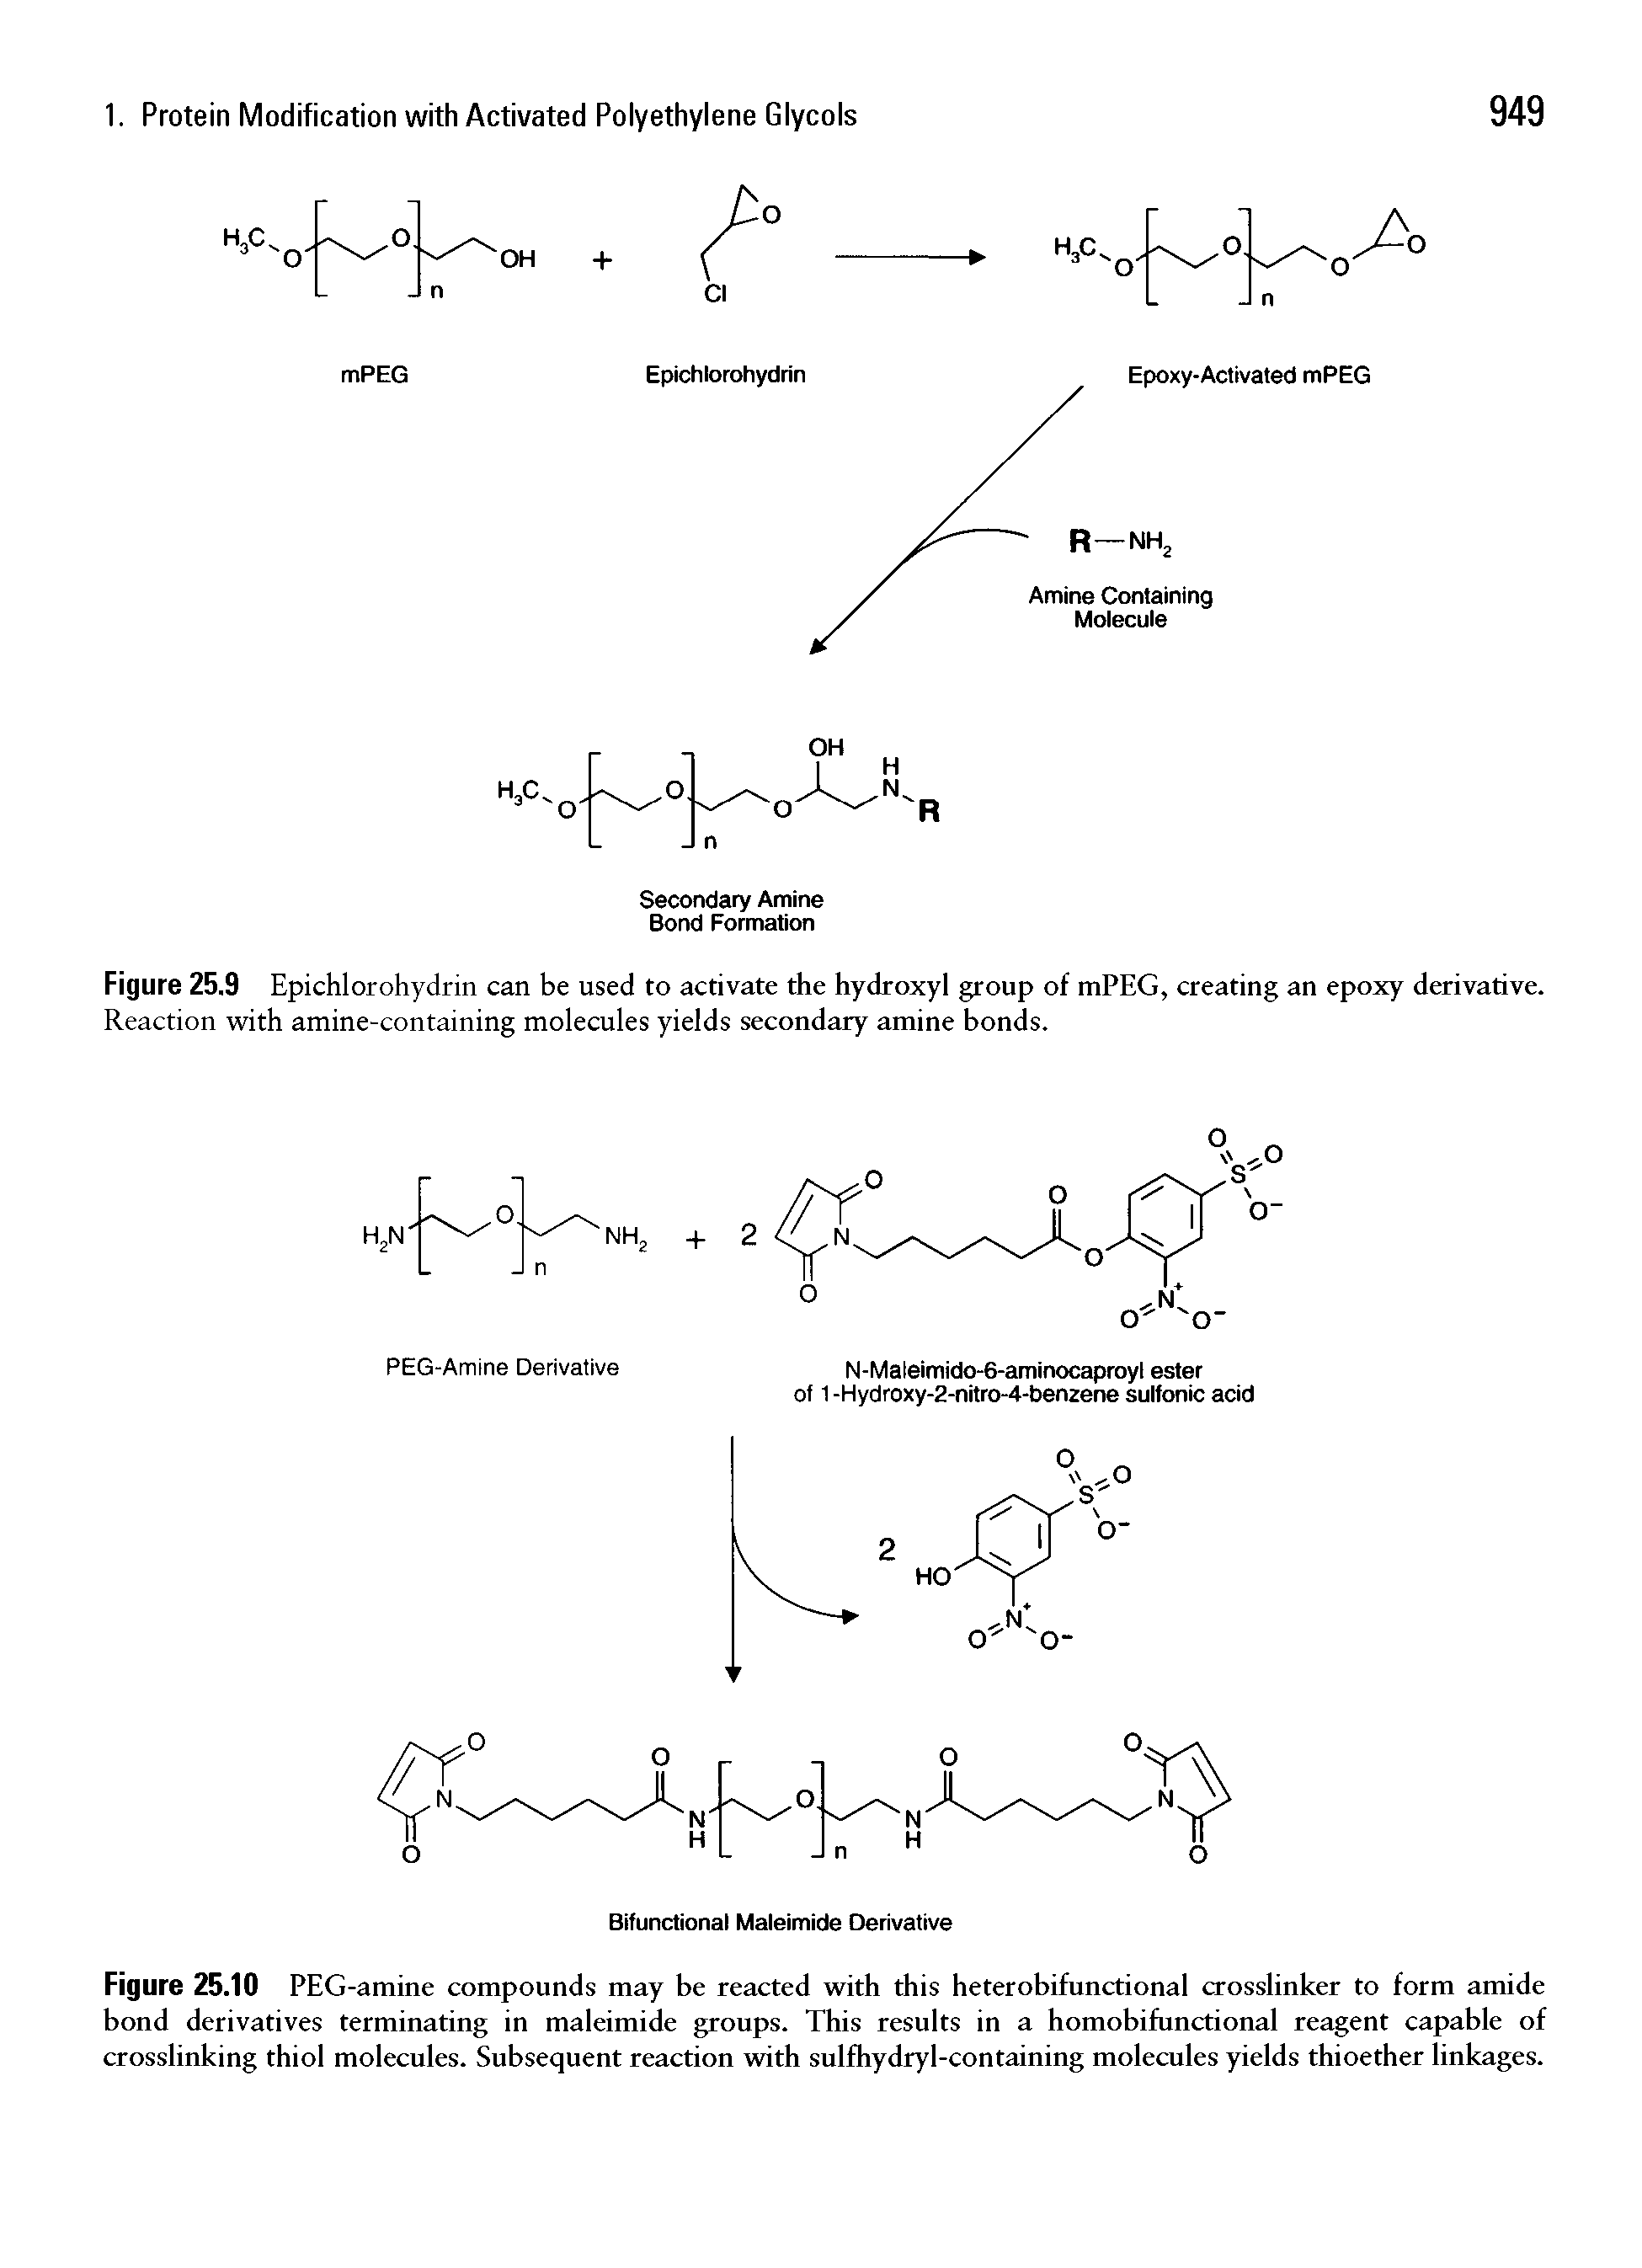 Figure 25.9 Epichlorohydrin can be used to activate the hydroxyl group of mPEG, creating an epoxy derivative. Reaction with amine-containing molecules yields secondary amine bonds.